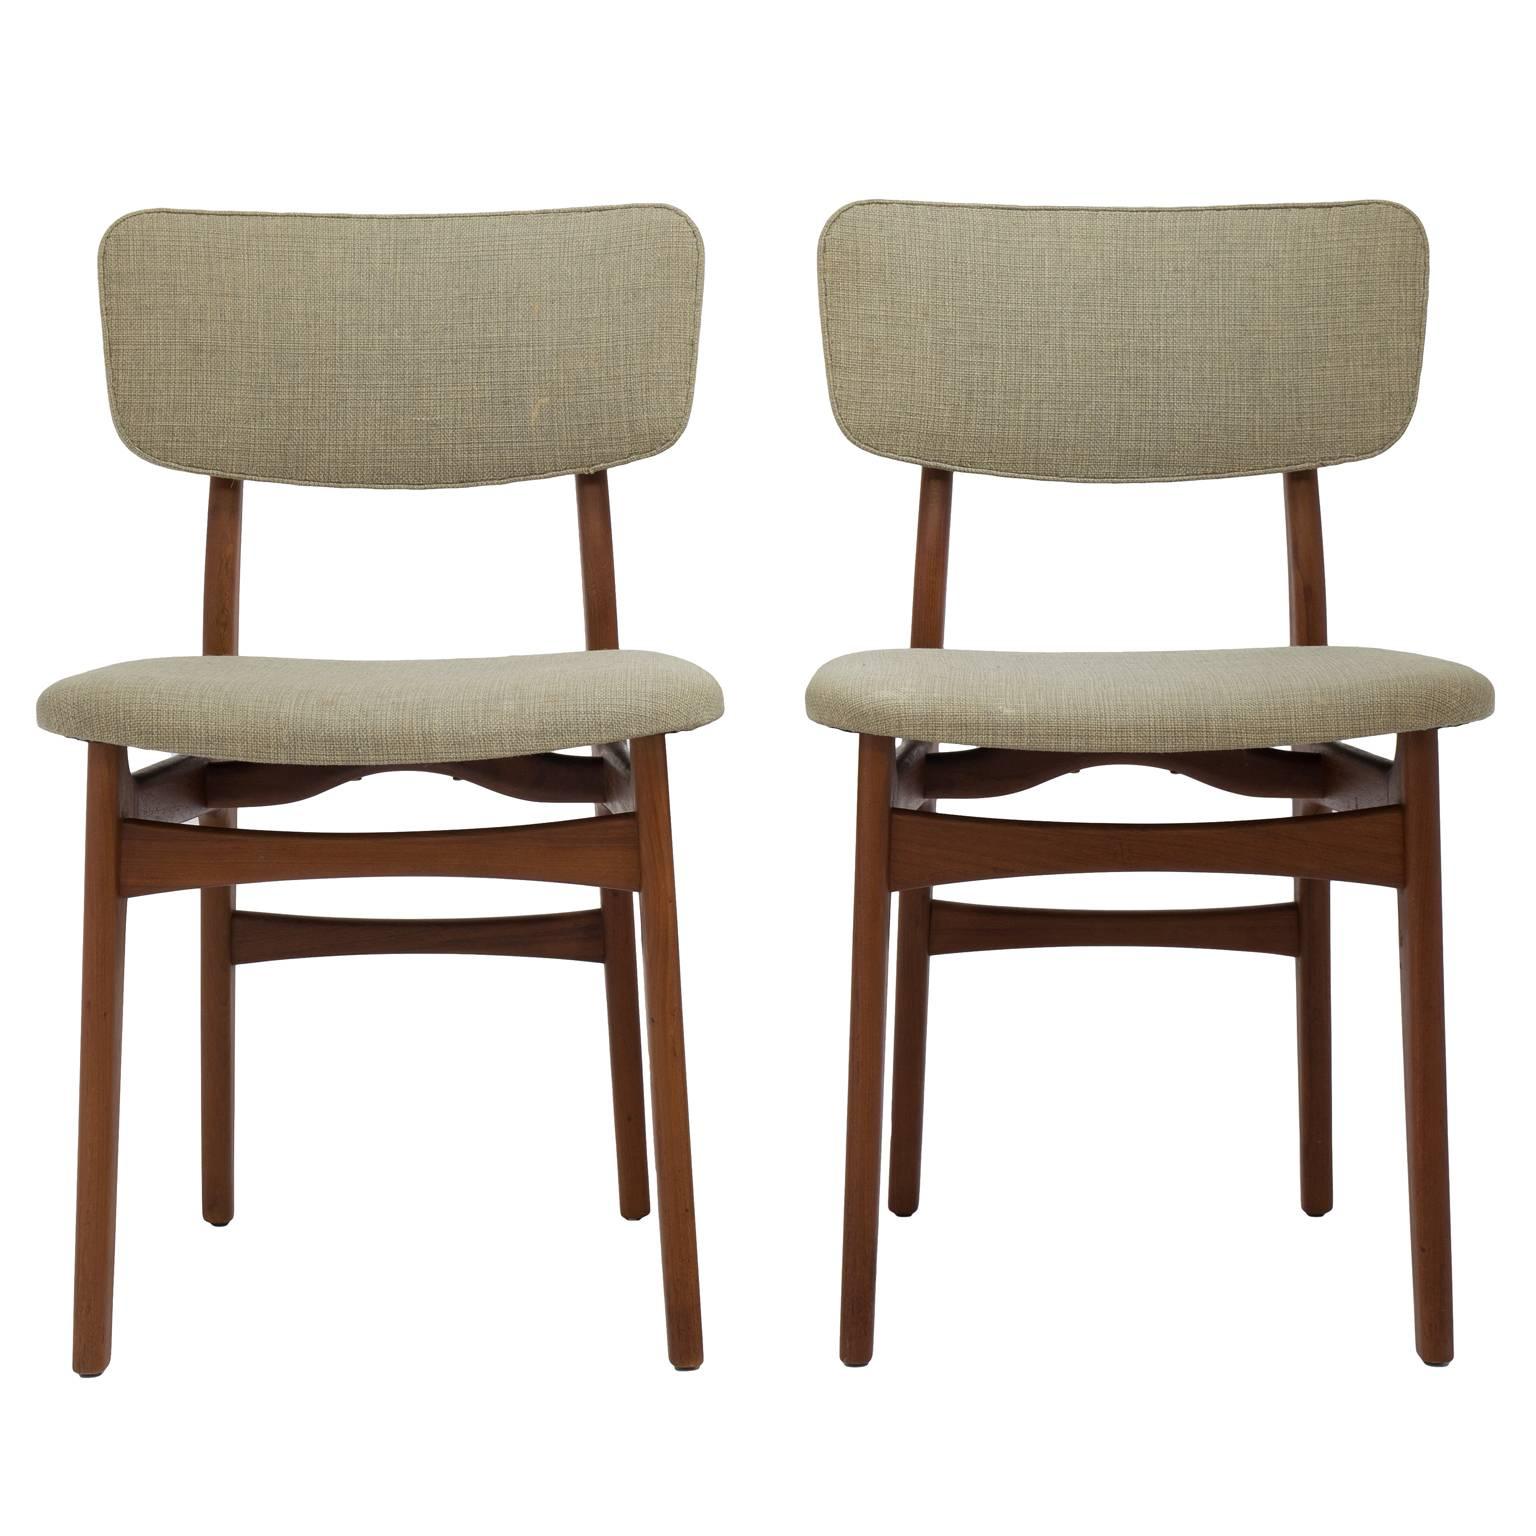 Mid-Century Danish modern side, desk or dining chair attributed to master cabinetmaker Gustav Bertelsen. Each chair is solid teak in its original pale green fabric, cushioned with horsehair. Two chairs available, sold separately. 